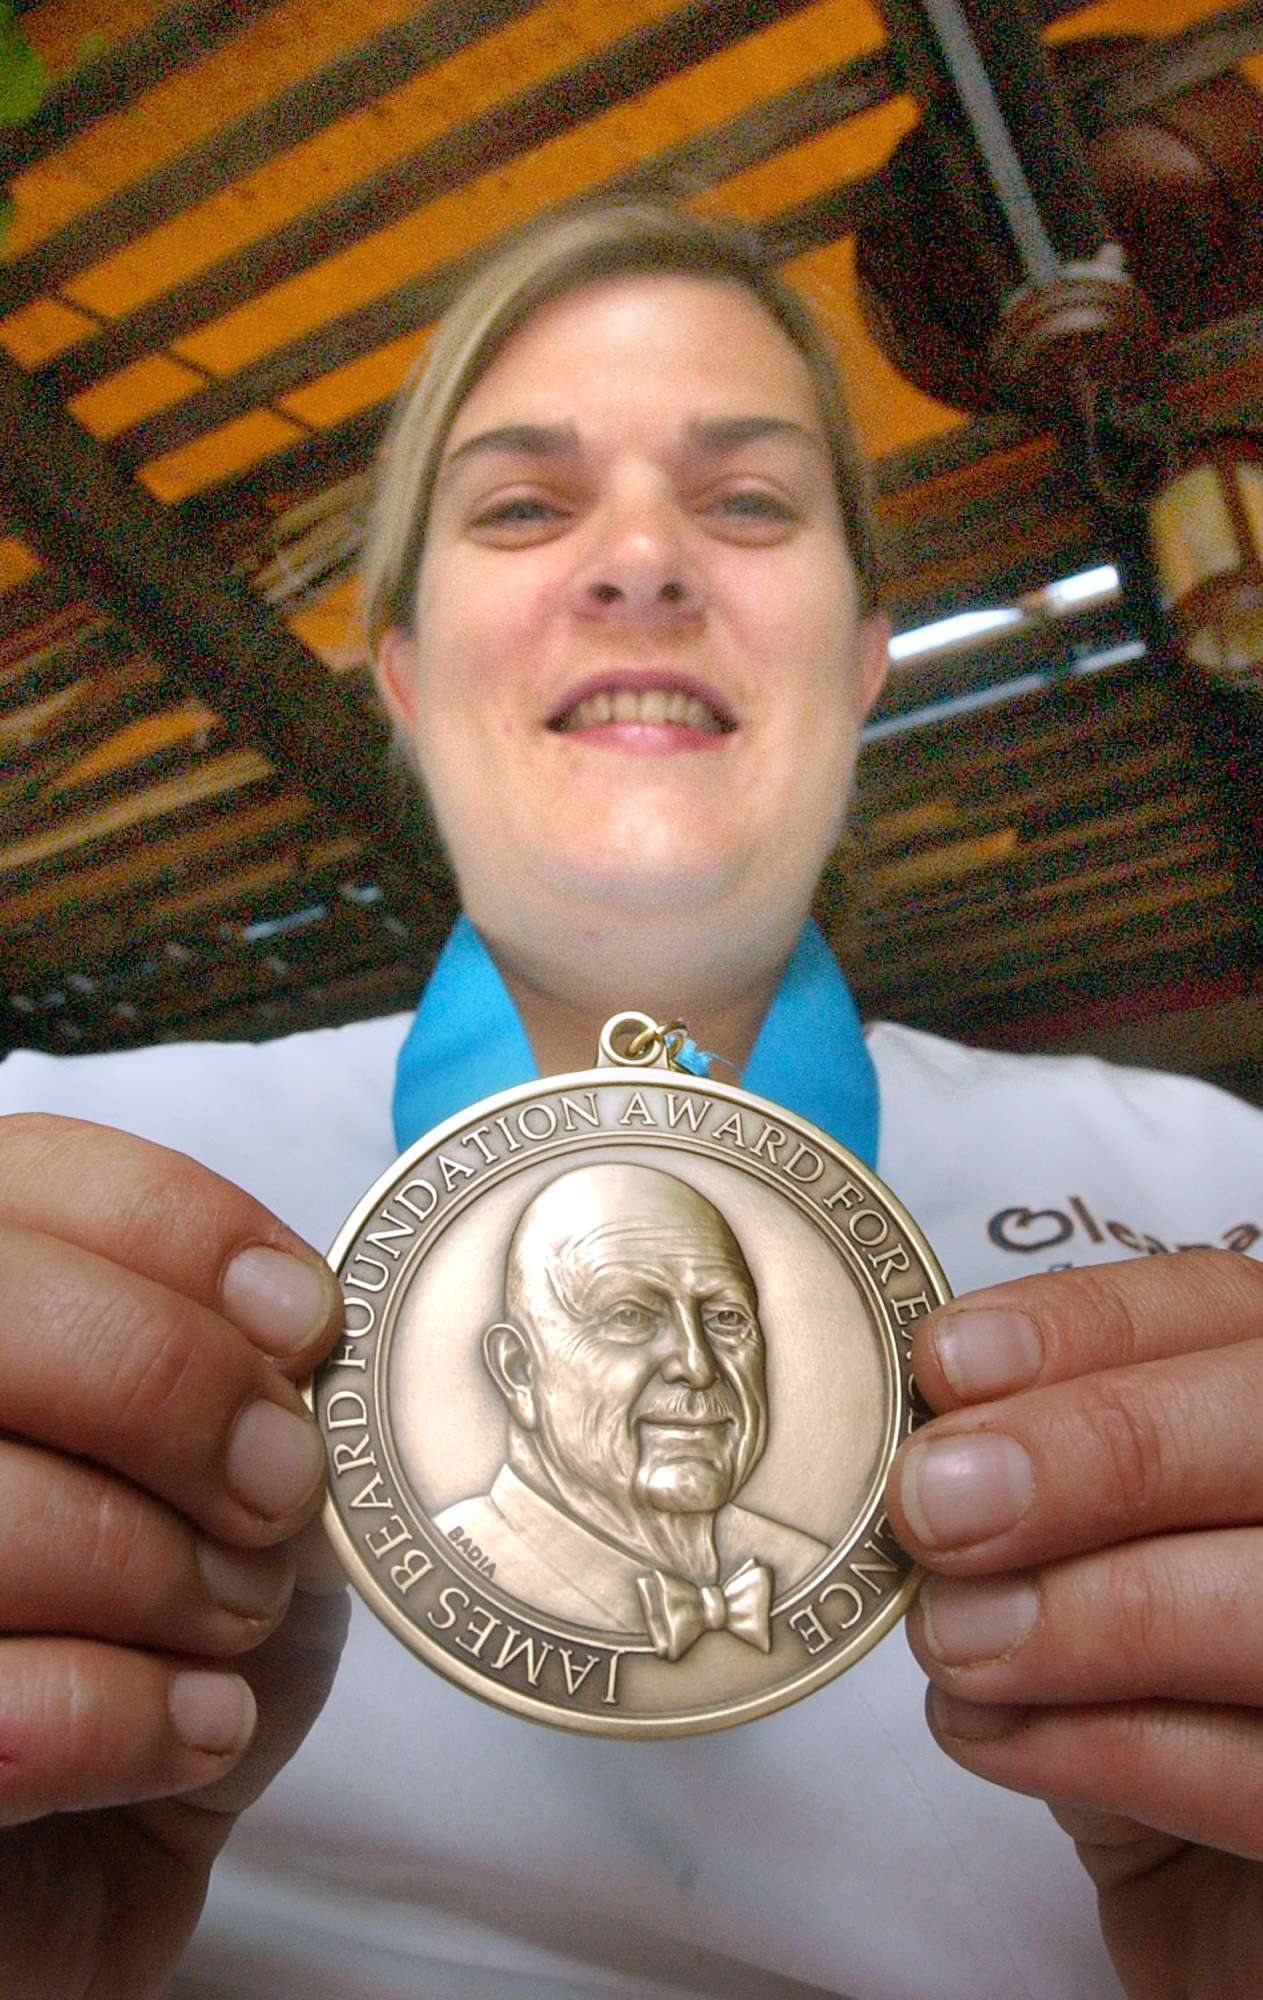 (6/17/05 CAMBRIDGE,MA) THE HERALD MEETS CHEF ANA SORTUN AT OLEANA RESTARAUNT. Sortun displays her James Beard medal at the restaraunt ({filename} - Staff Photo by Patrick Whittemore. Saved in Adv FOOD and Daily Photo Archive).